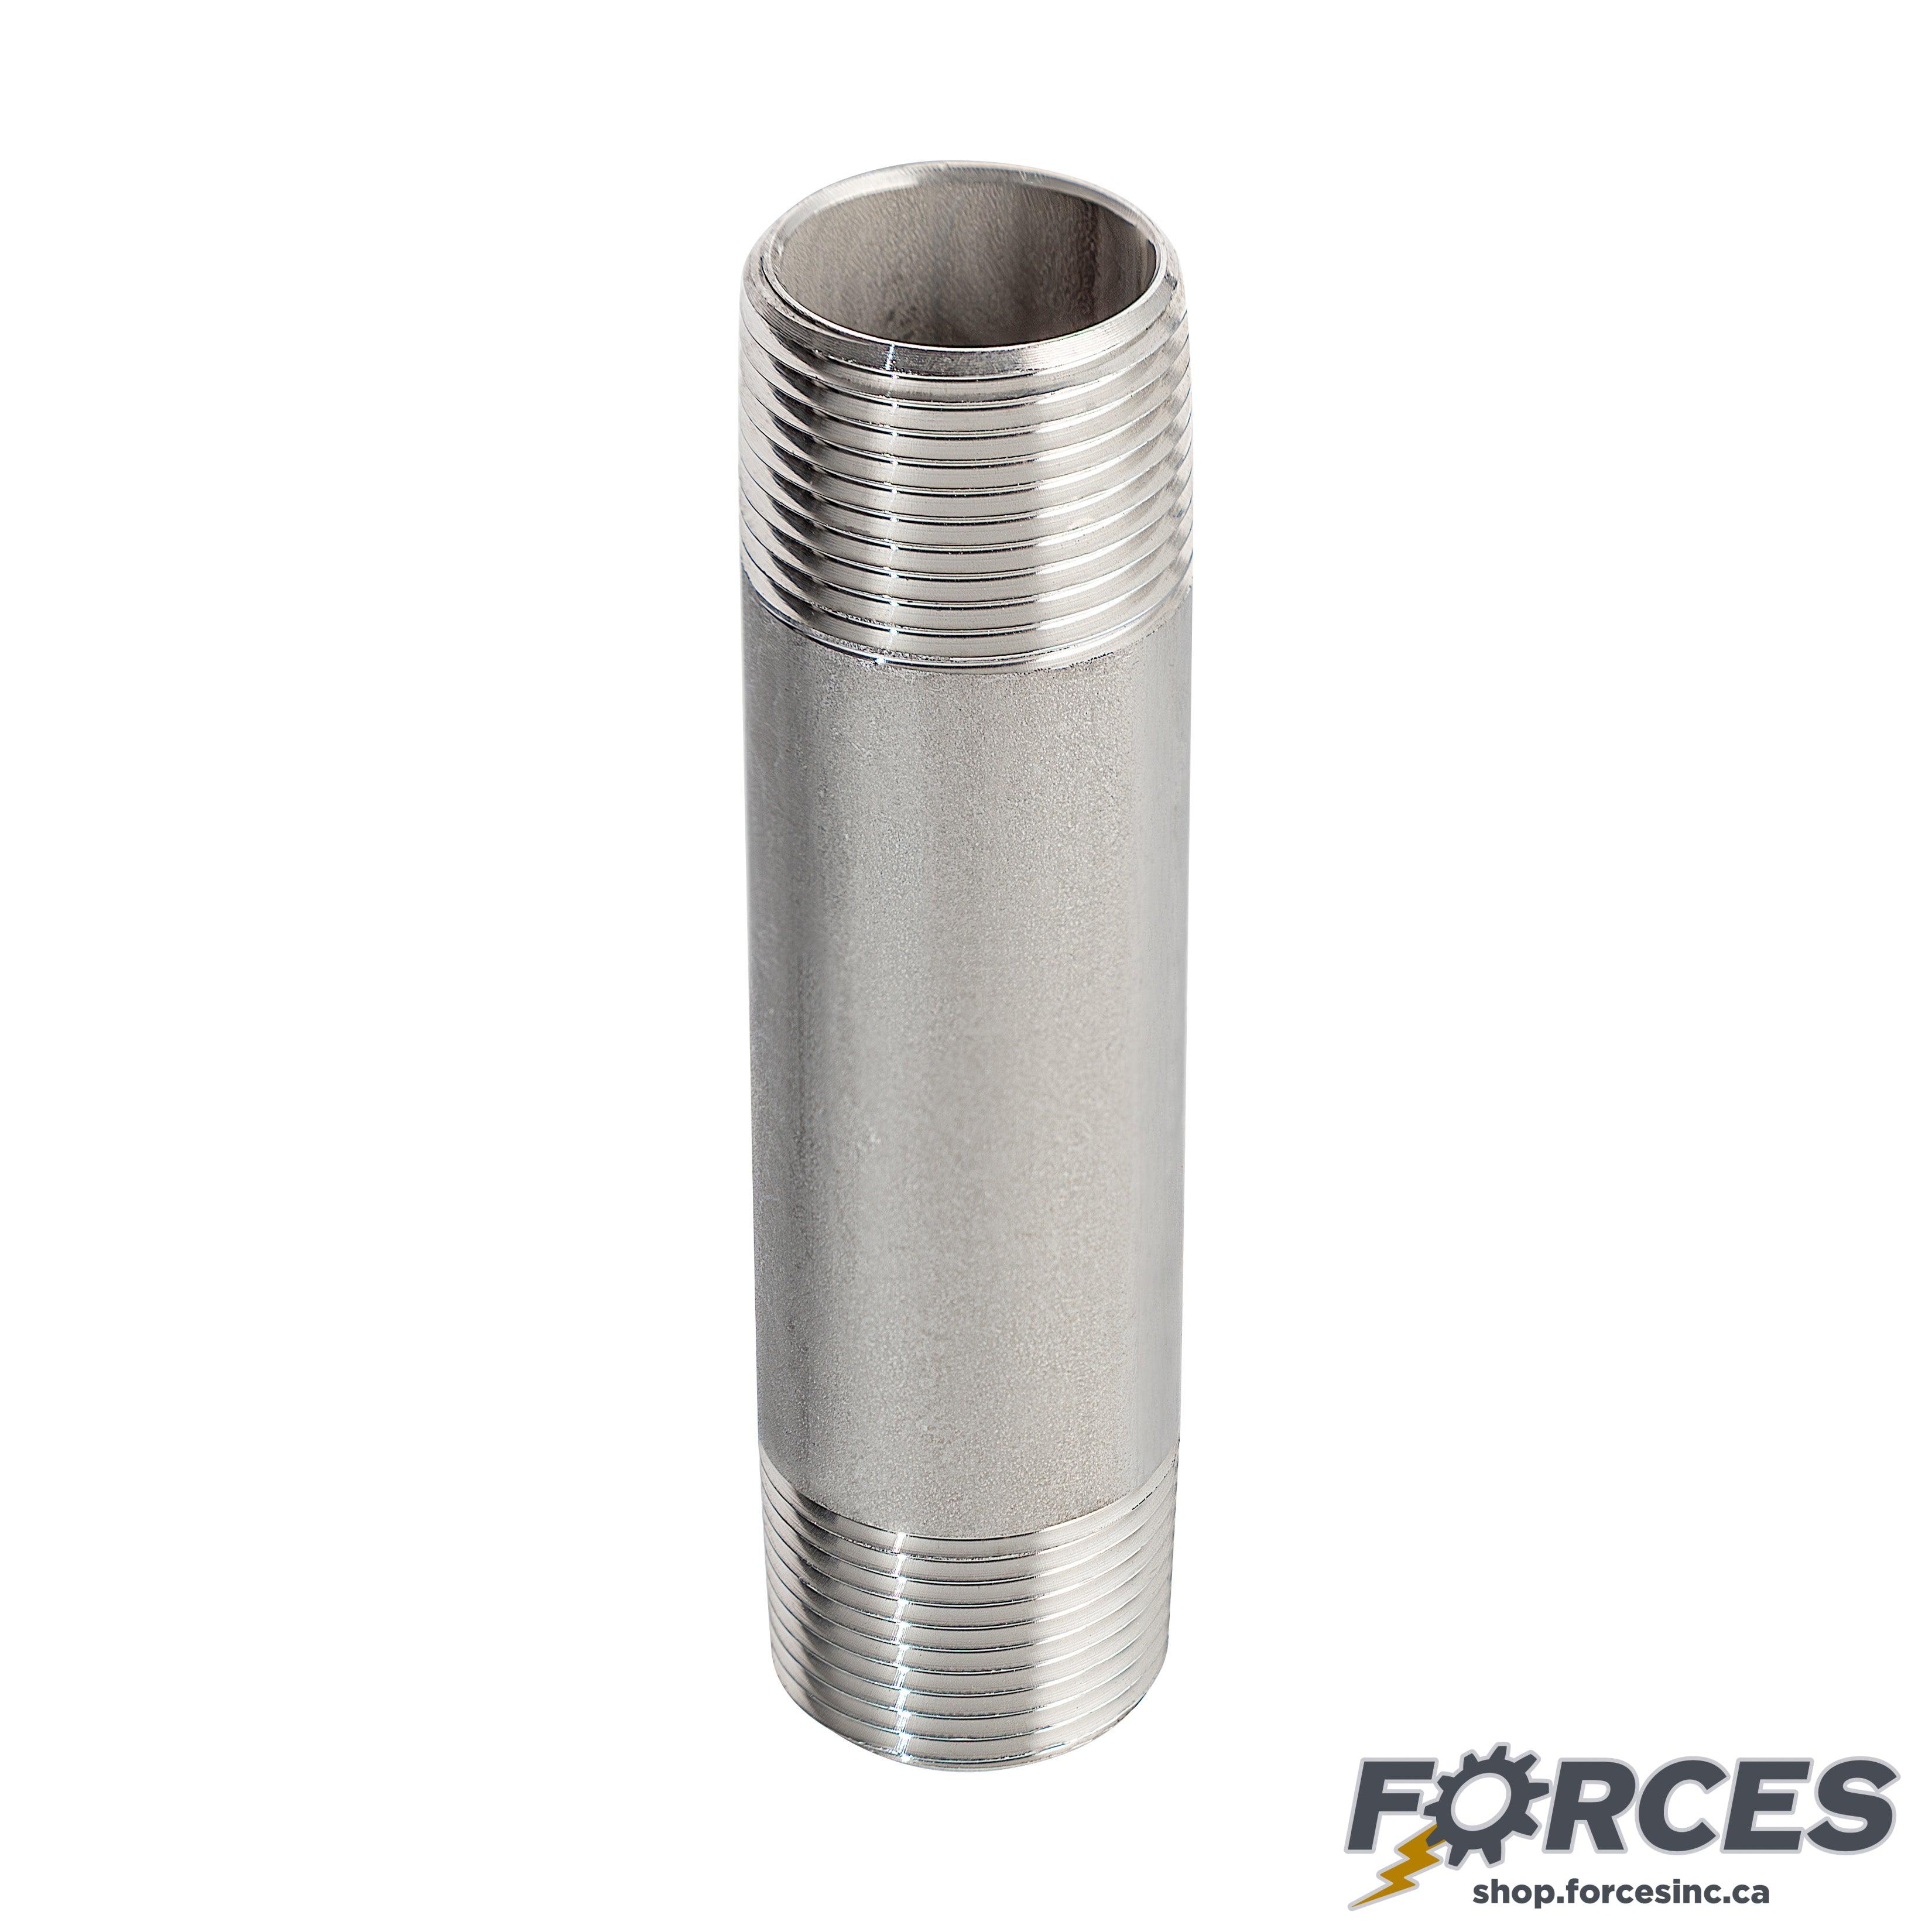 1/4" X 3" Long Nipple - Stainless Steel 316 - Forces Inc